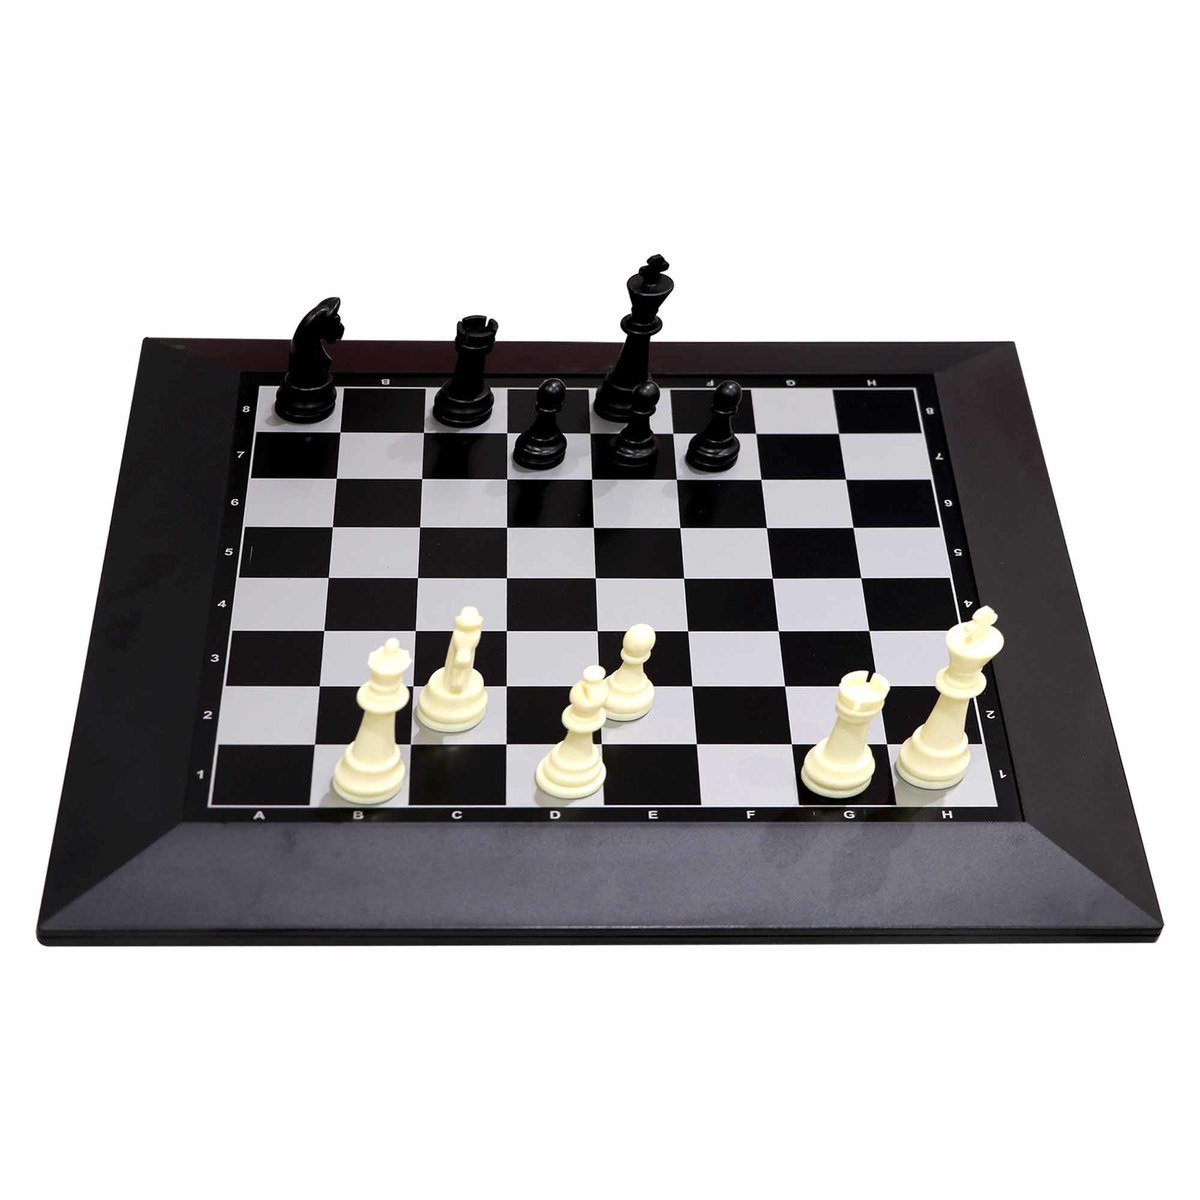 Skid Fusion Chess Game TS0257001